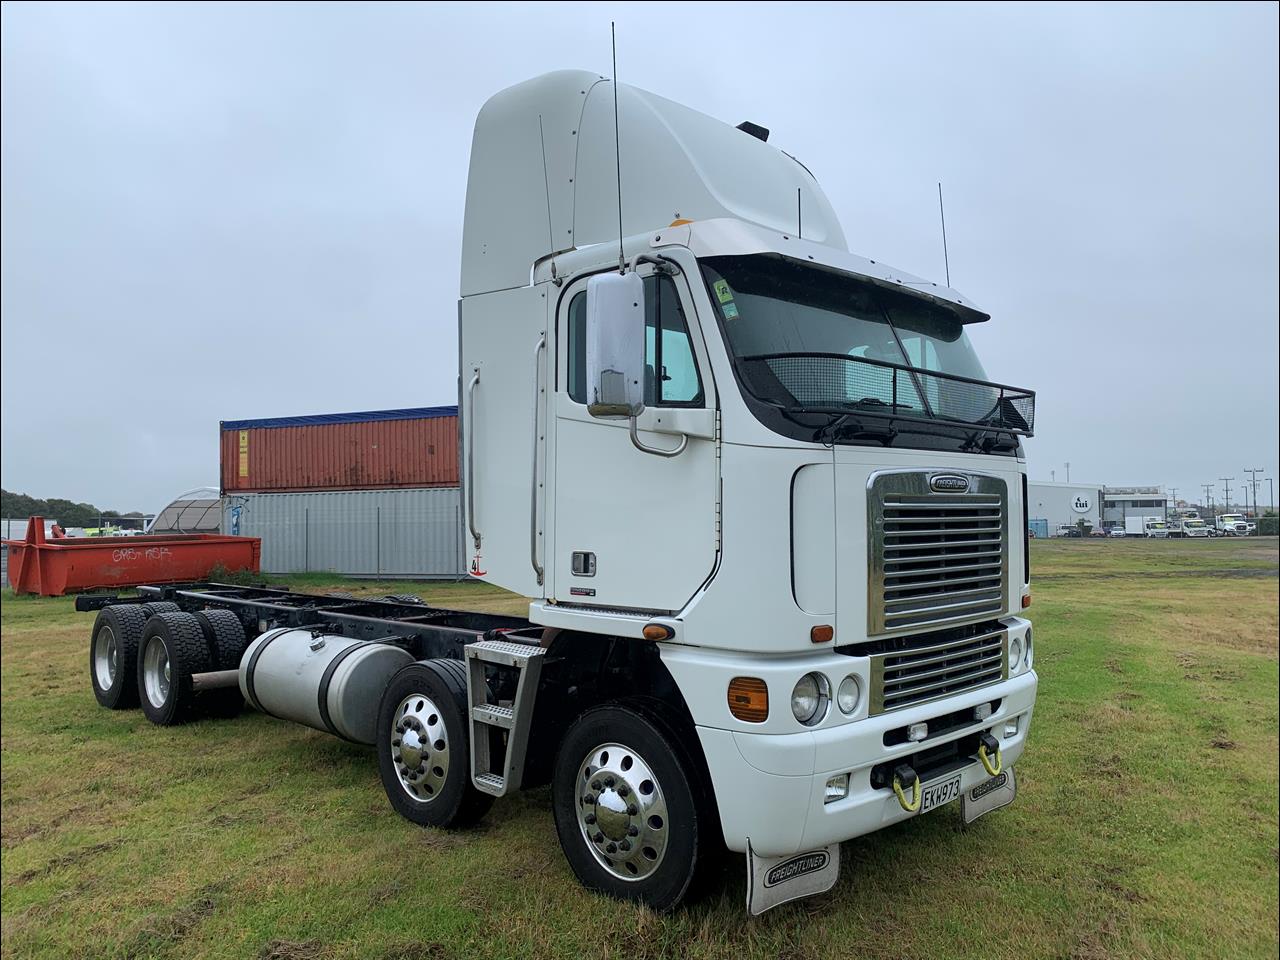 Image - 2008 Freightliner ARGOSY - 8x4 Cab Chassis